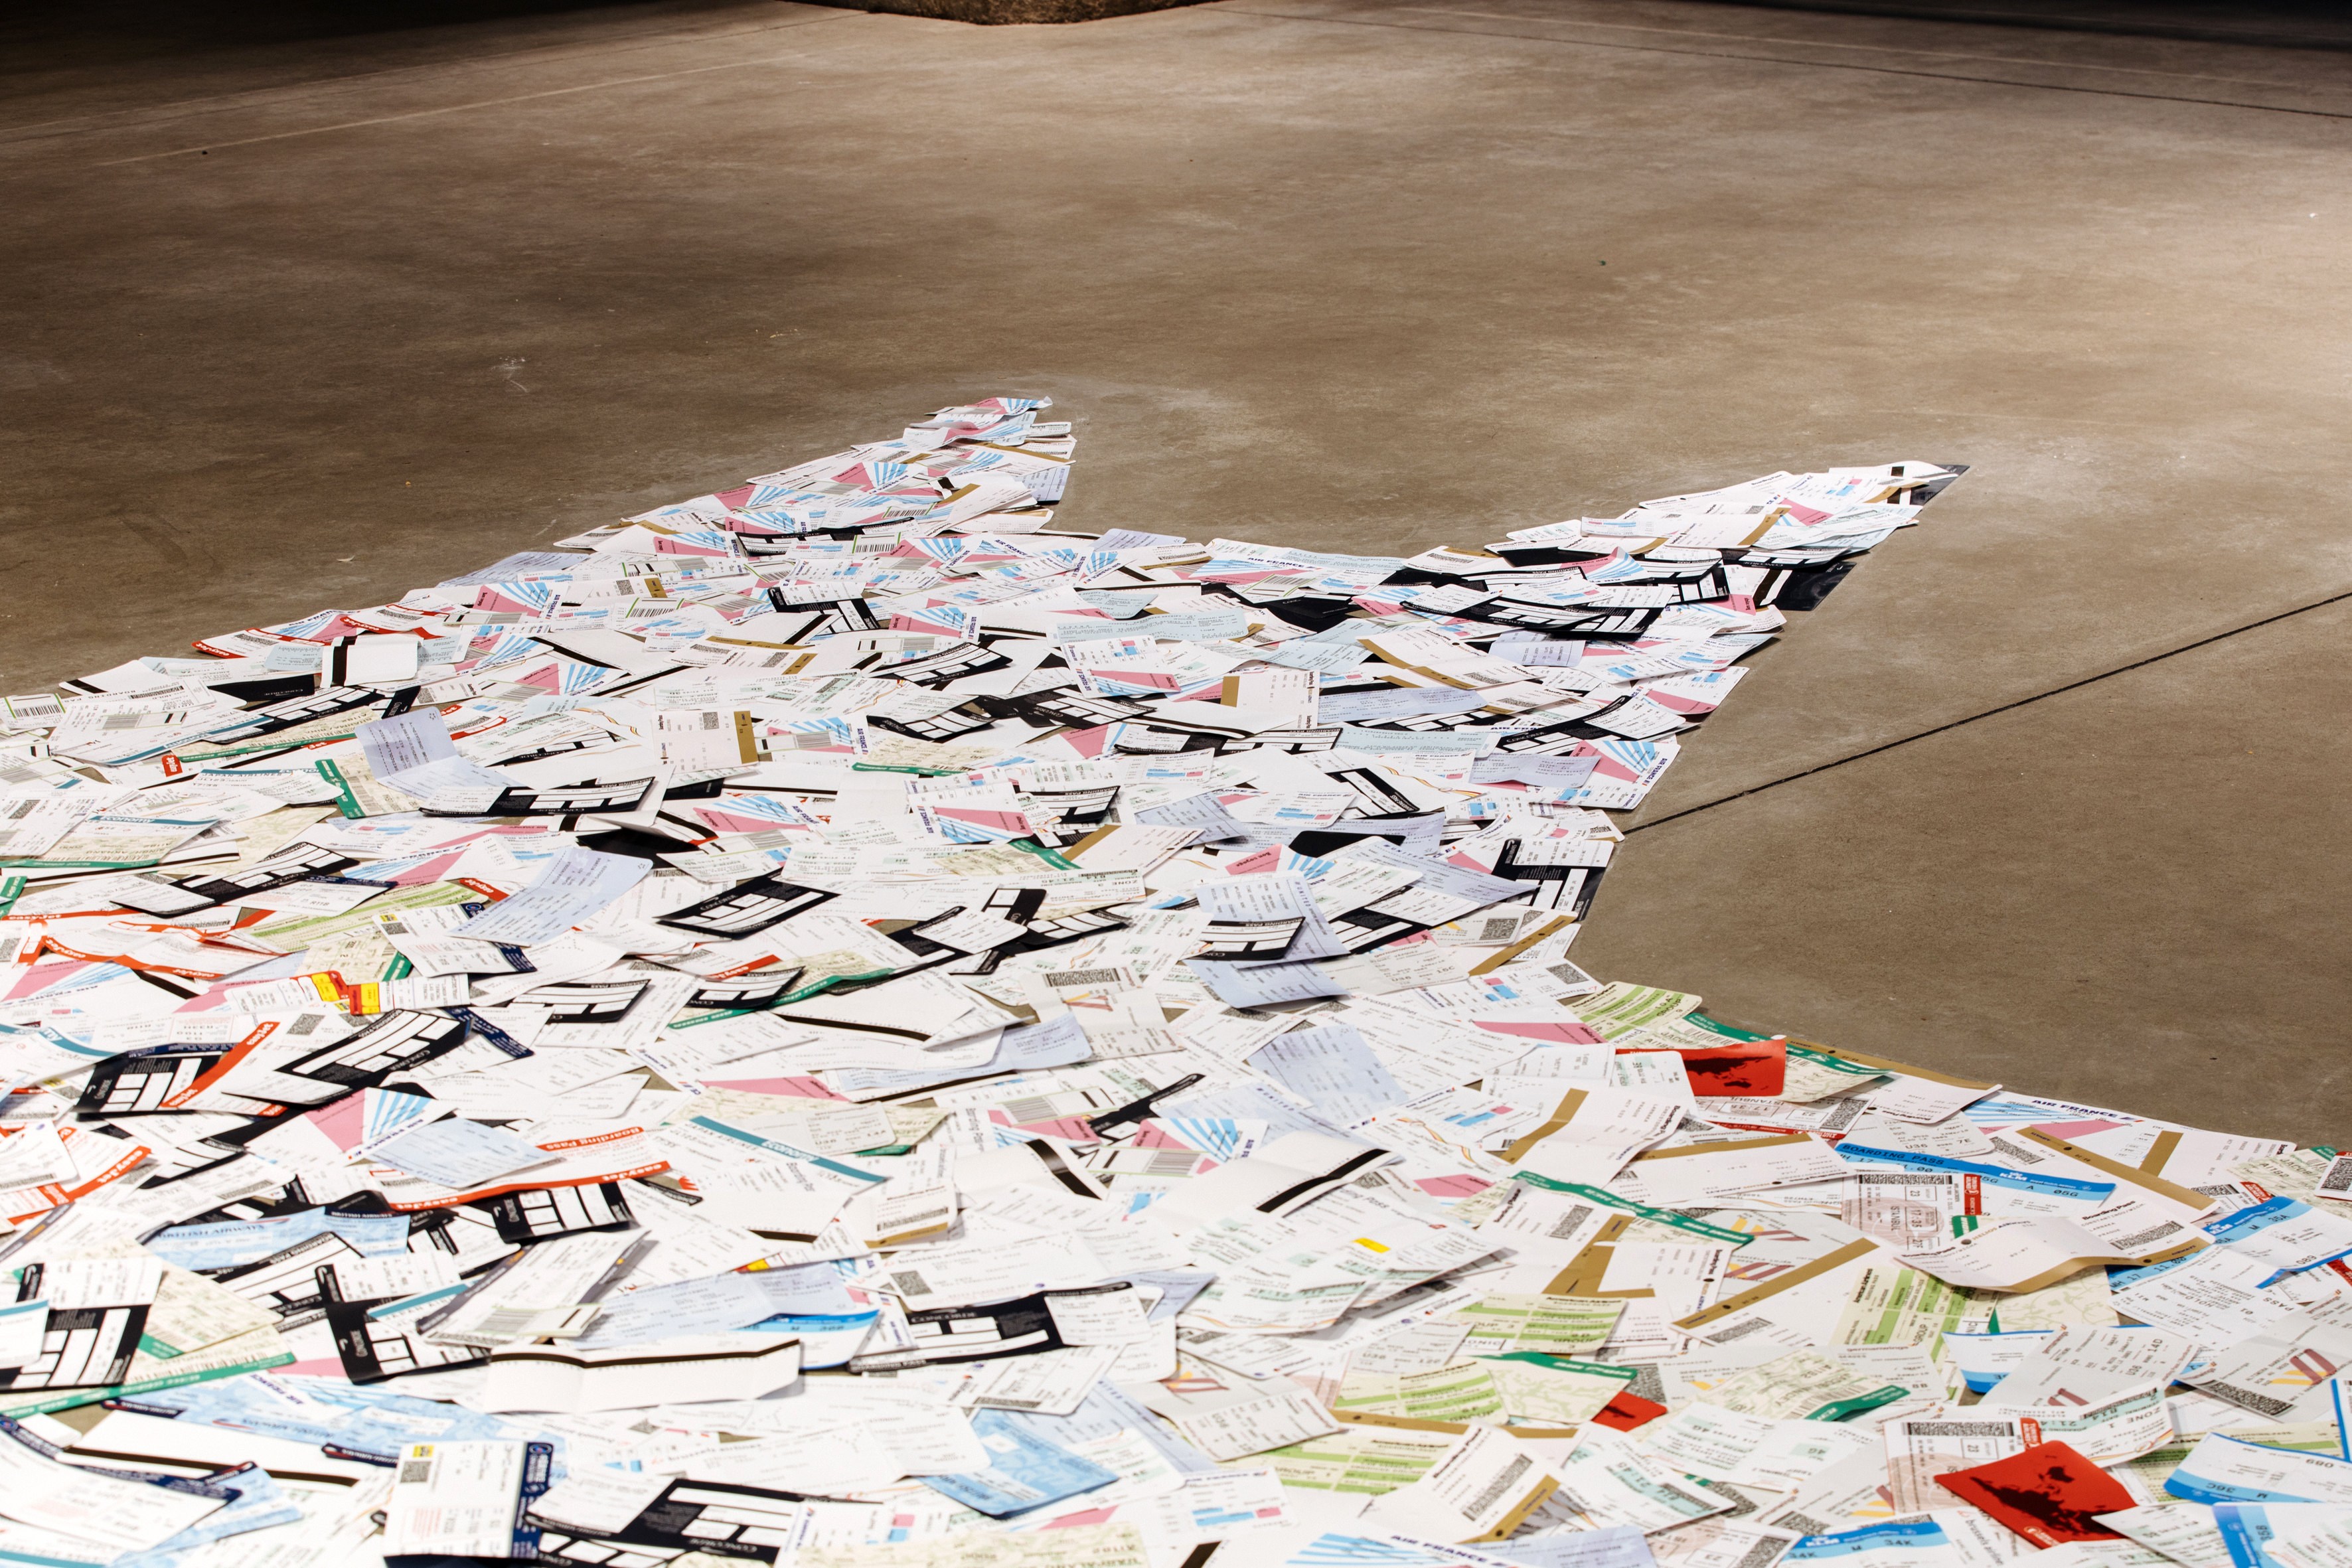 empty seats - 2022 - material: about 5000 replicated airplane tickets of different airlines, patafix glue pads, 1100 × 1 × 547 cm